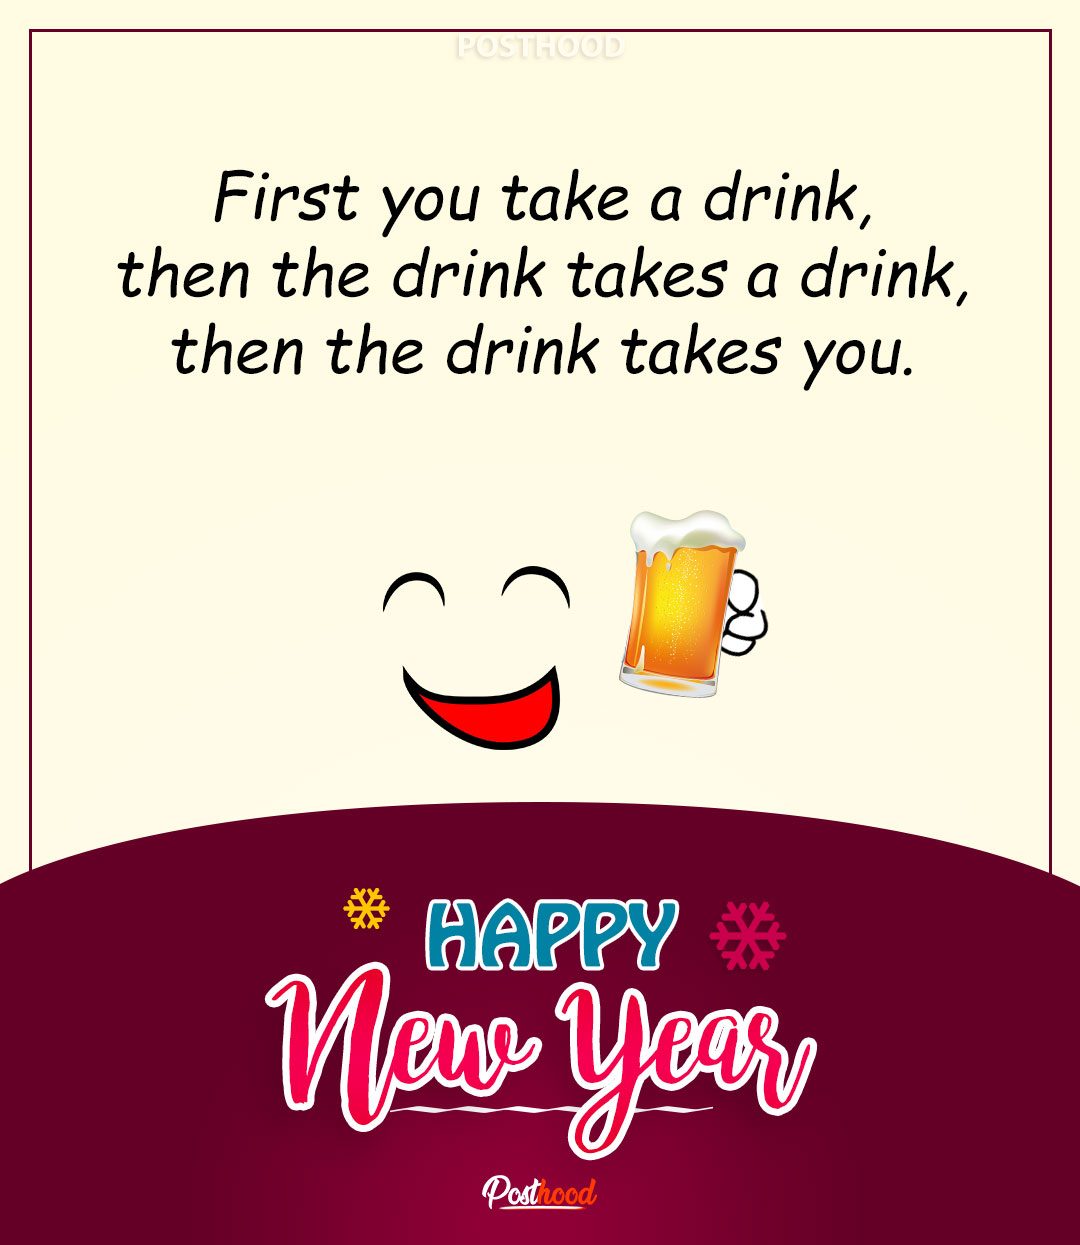 Fantastic collection of funny New Year wishes for friends, colleagues and close family. This funny New Year message is best suited for your drinker friends. 